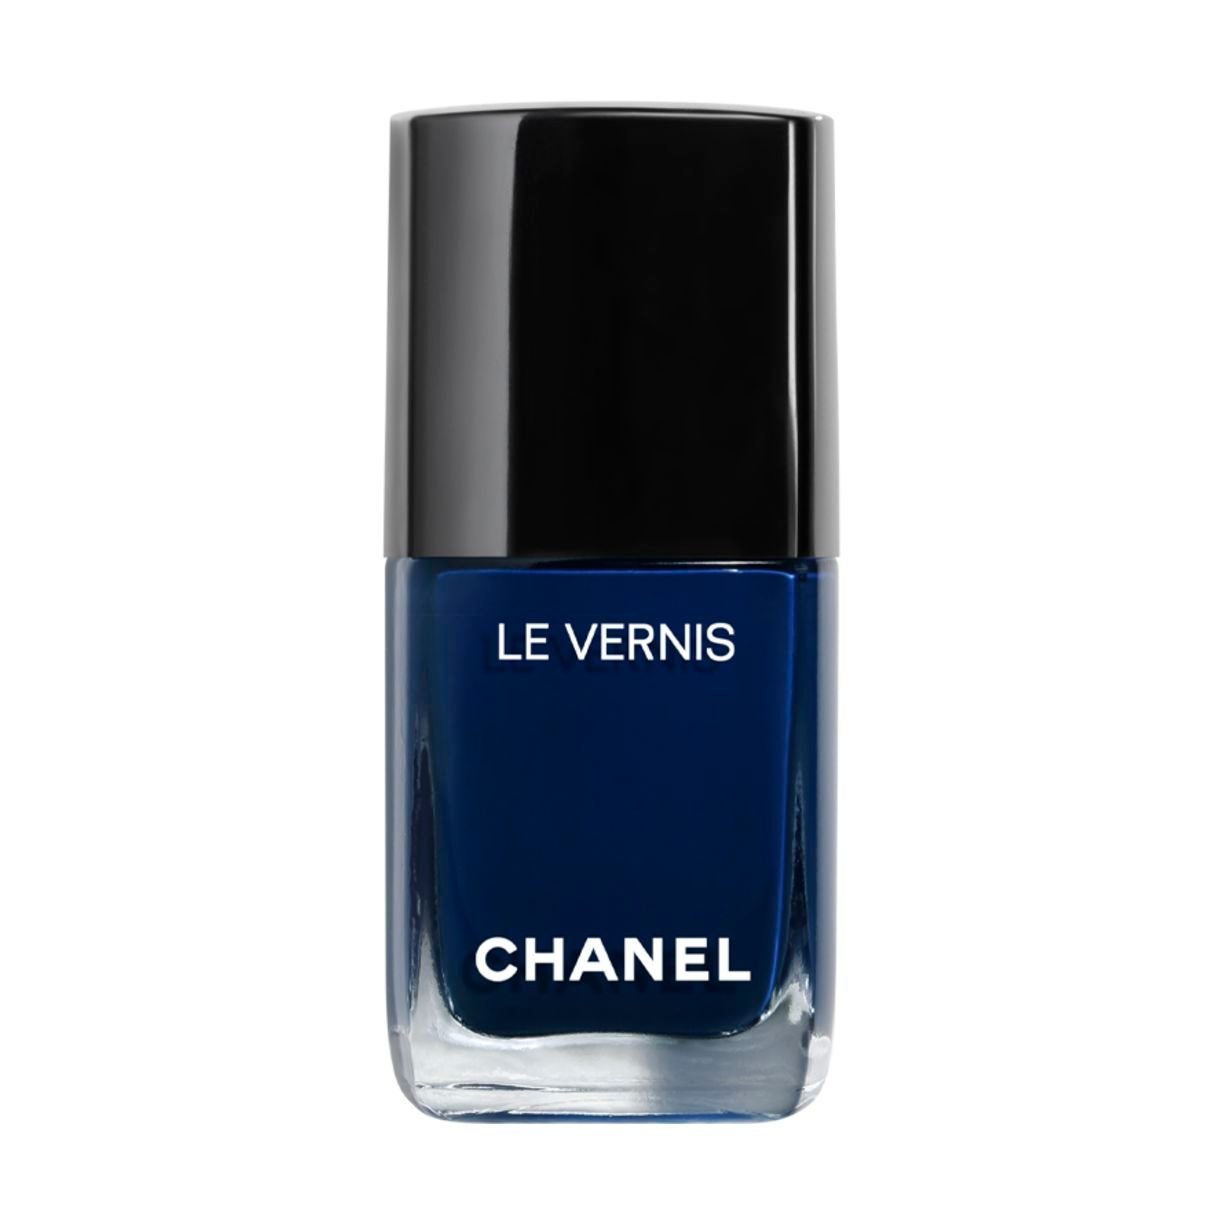 Buy DeBelle Gel Nail Polish Combo Set of 2 Navy Blue(Bleu Allure), Light  Mauve(Laura Aura) - 16 ml(8 ml Each) Online at Low Prices in India - Amazon .in